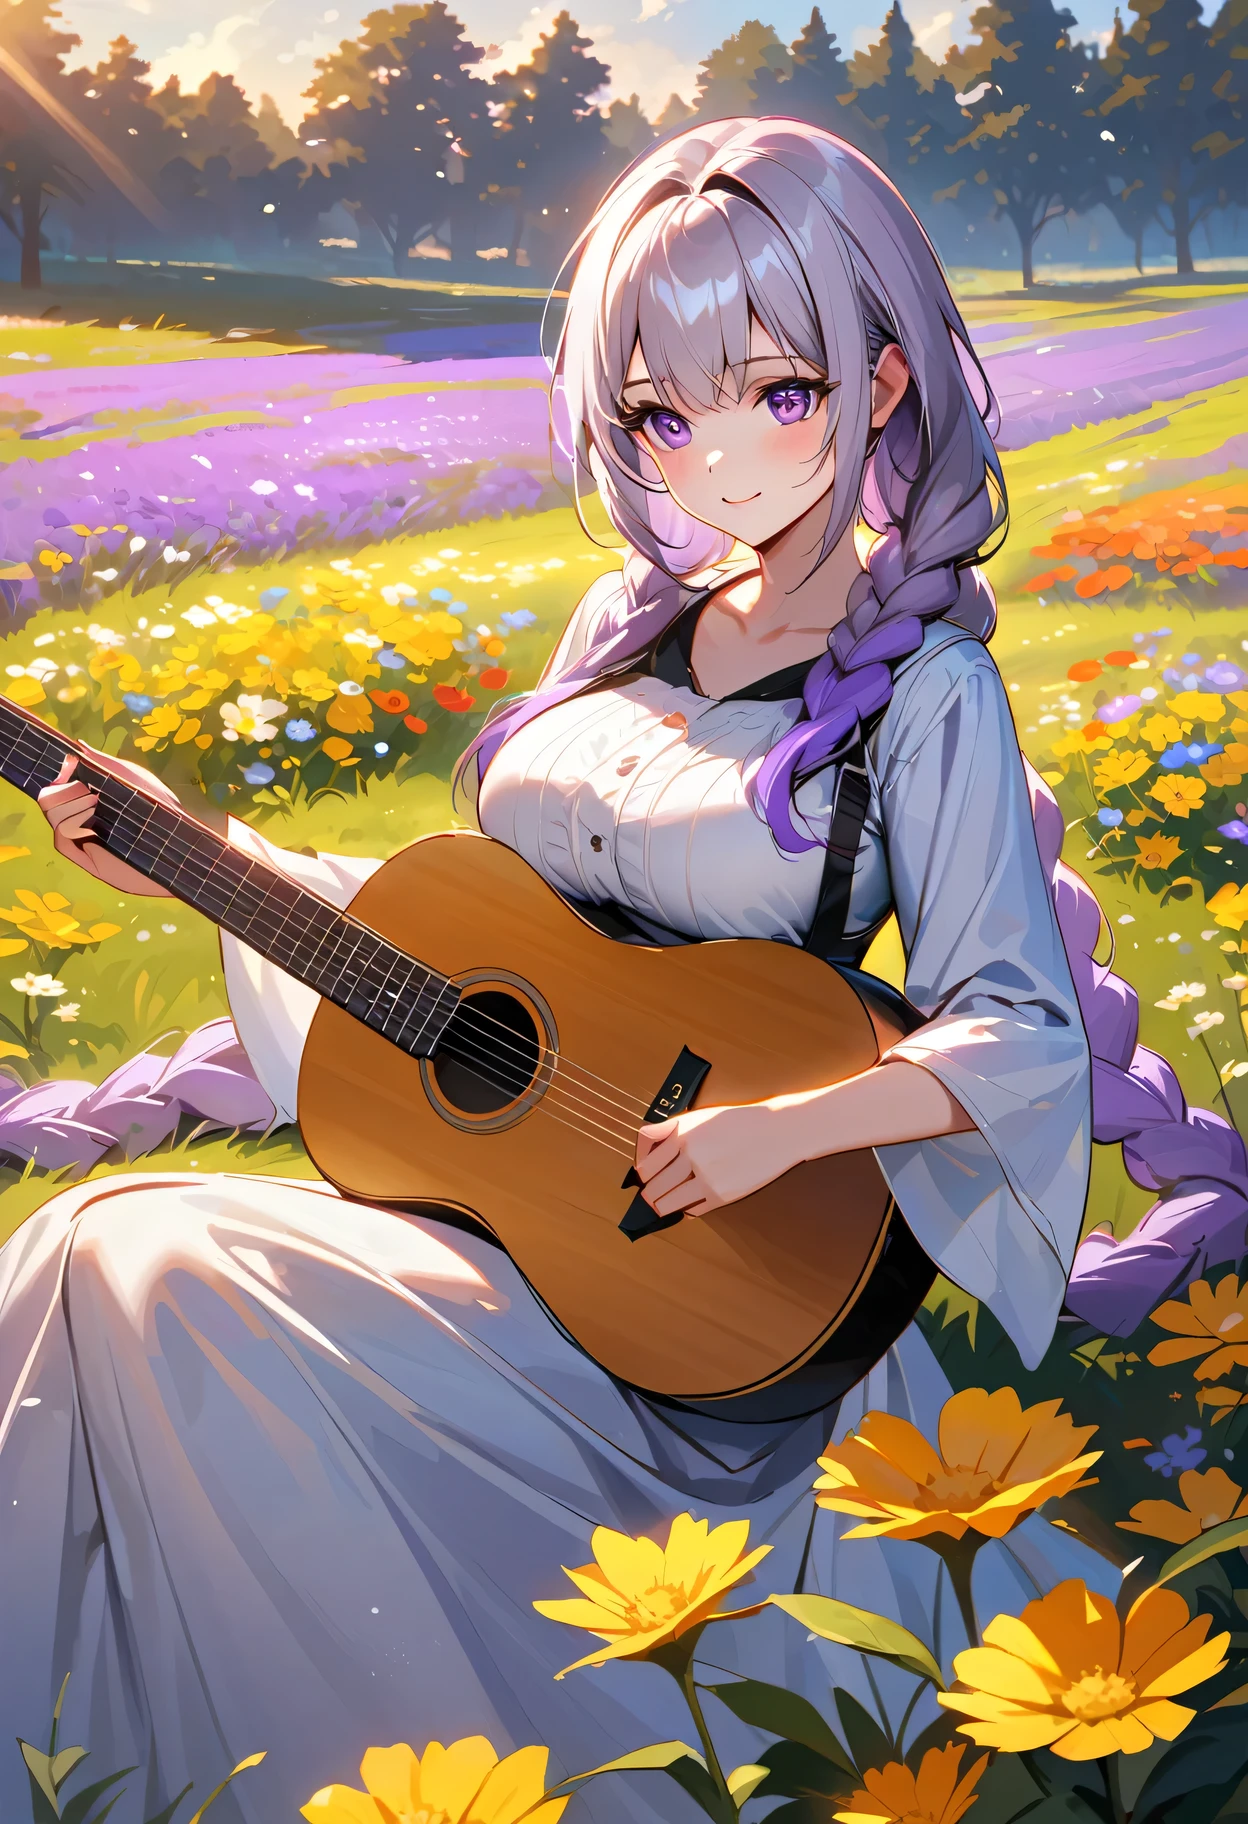 Evening sunset,A girl sitting on a vast field playing the guitar,yinji , purple hair,purple eyes,very long hair,grey hair,double braid,large breasts,gradient hair, Smile, Beautiful Face,The golden sunlight softly illuminates her face, highlighting her delicate features. The field is filled with colorful wildflowers, swaying gently in the breeze:1.1 vibrant red poppies, elegant purple lavender, and delicate yellow daisies. The girl's fingers gracefully glide along the guitar strings, producing melodic tunes that harmonize with the peaceful ambiance of nature. Her music resonates with the beauty of the surrounding landscape, creating a serene and captivating atmosphere. The warm sunlight casts long shadows on the ground, adding depth and dimension to the scene. The overall composition exudes a sense of tranquility and artistic elegance, capturing the essence of a poetic moment in time.